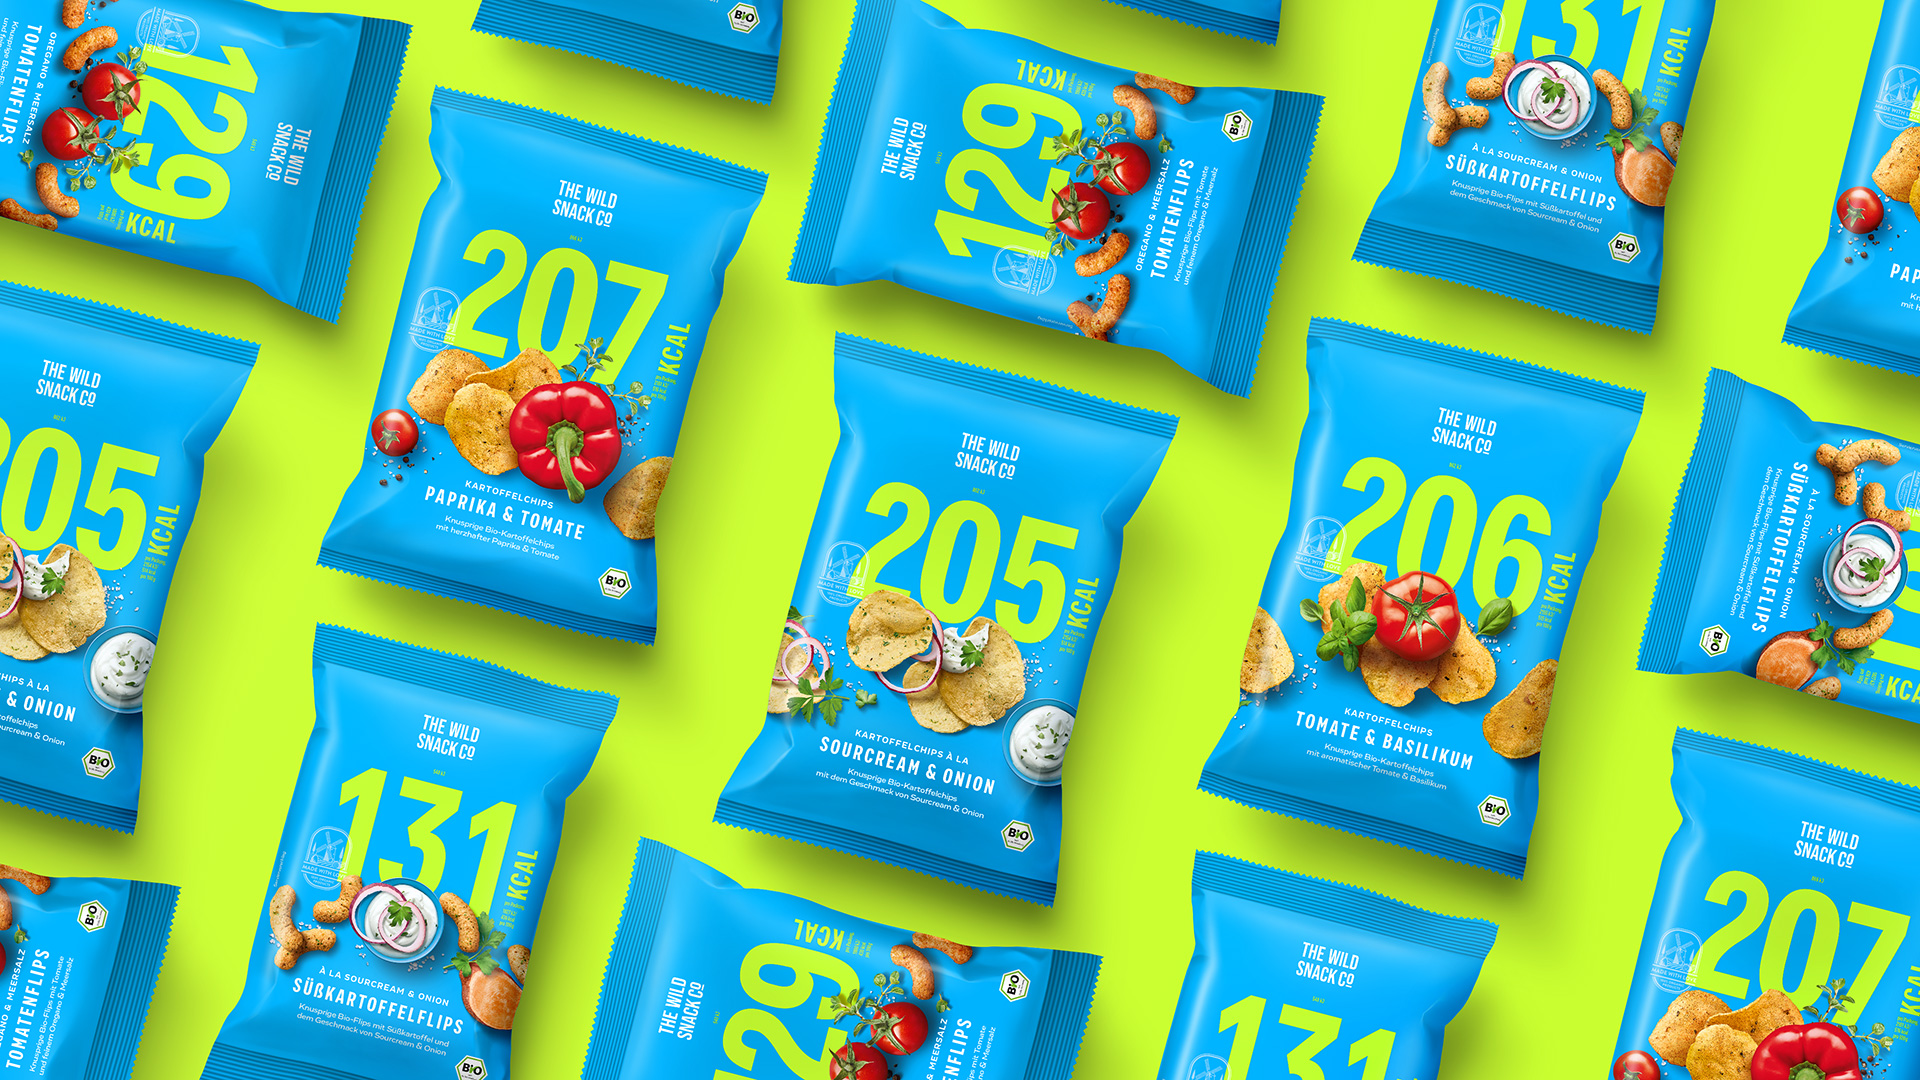 Packaging Design for The Wild Snack Company’s Crisps and Puffs